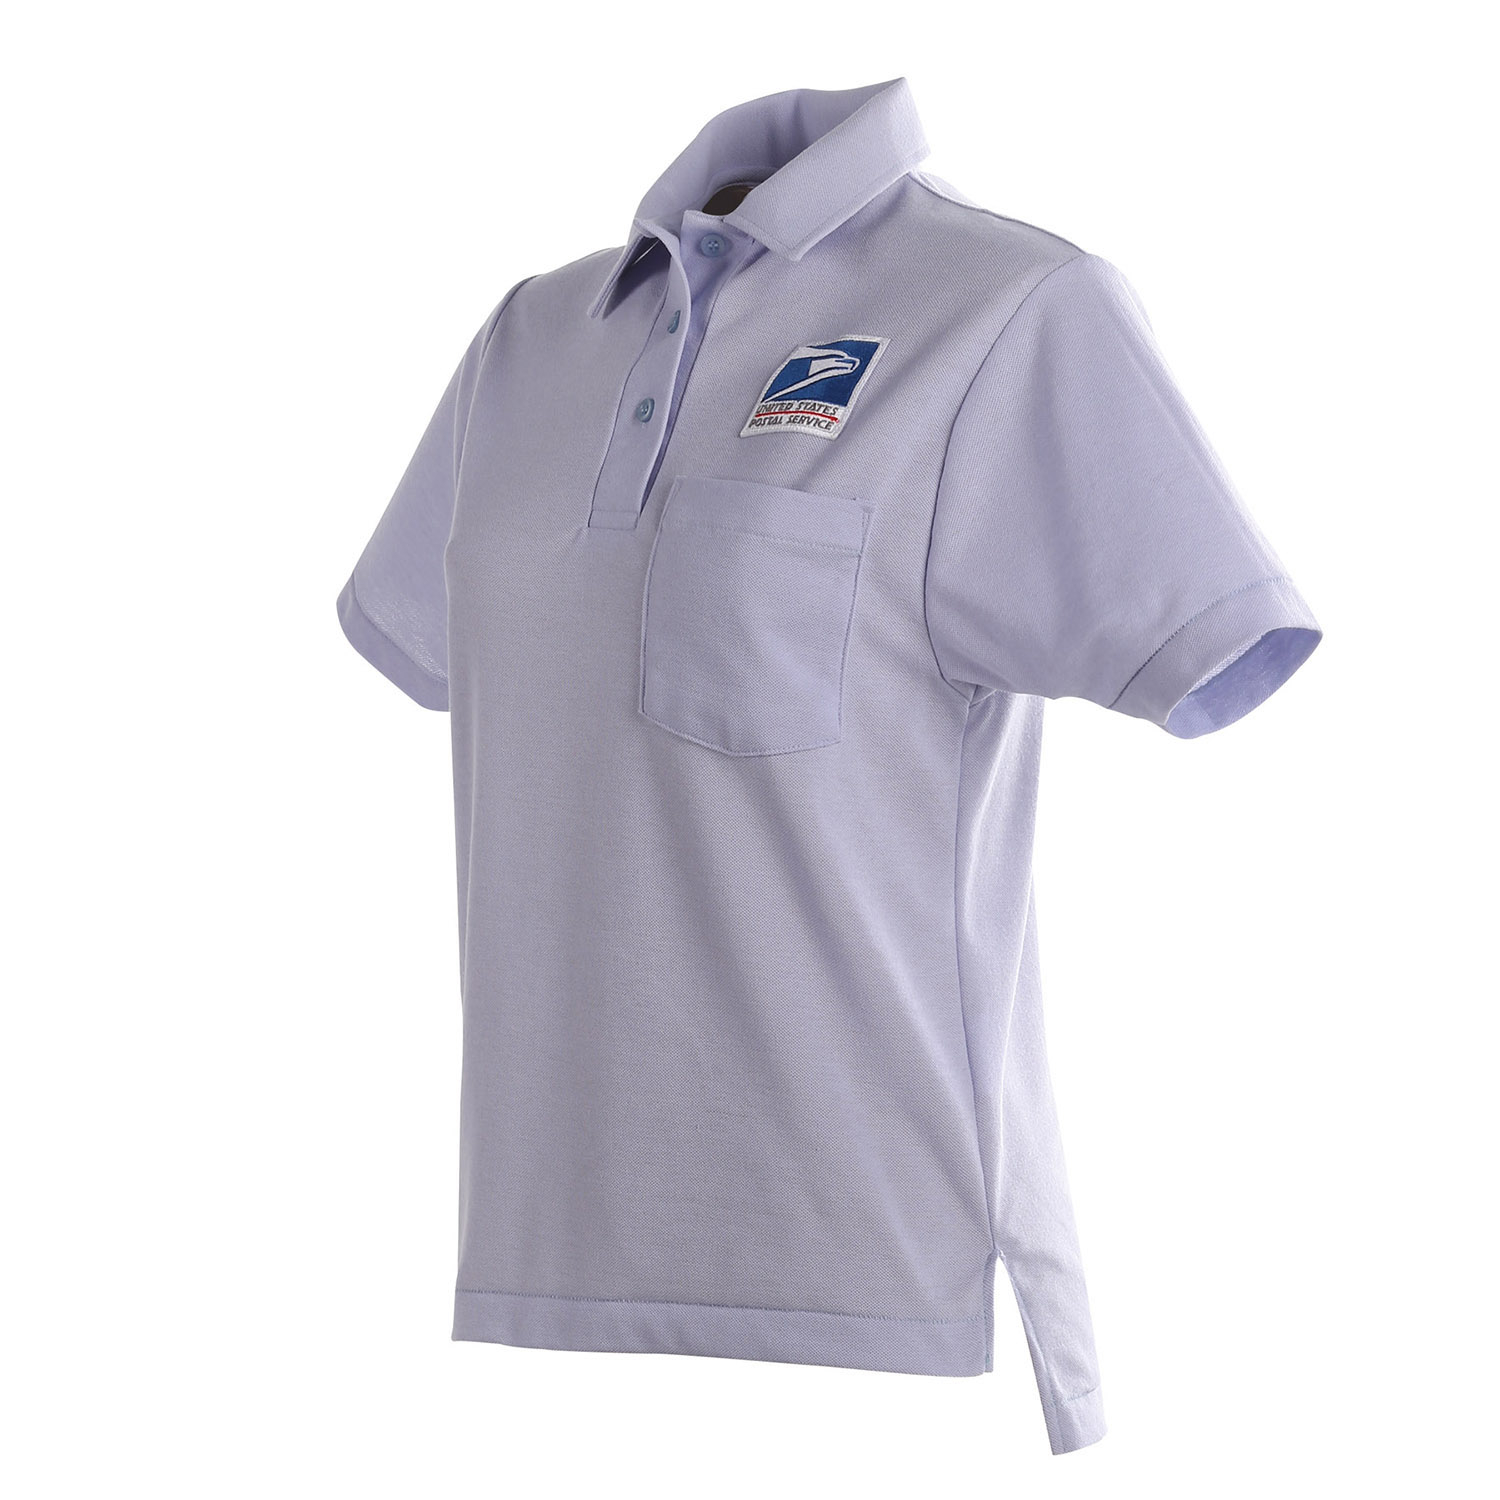 Womens Knit Polo Shirt for Letter Carriers and Motor Vehicle